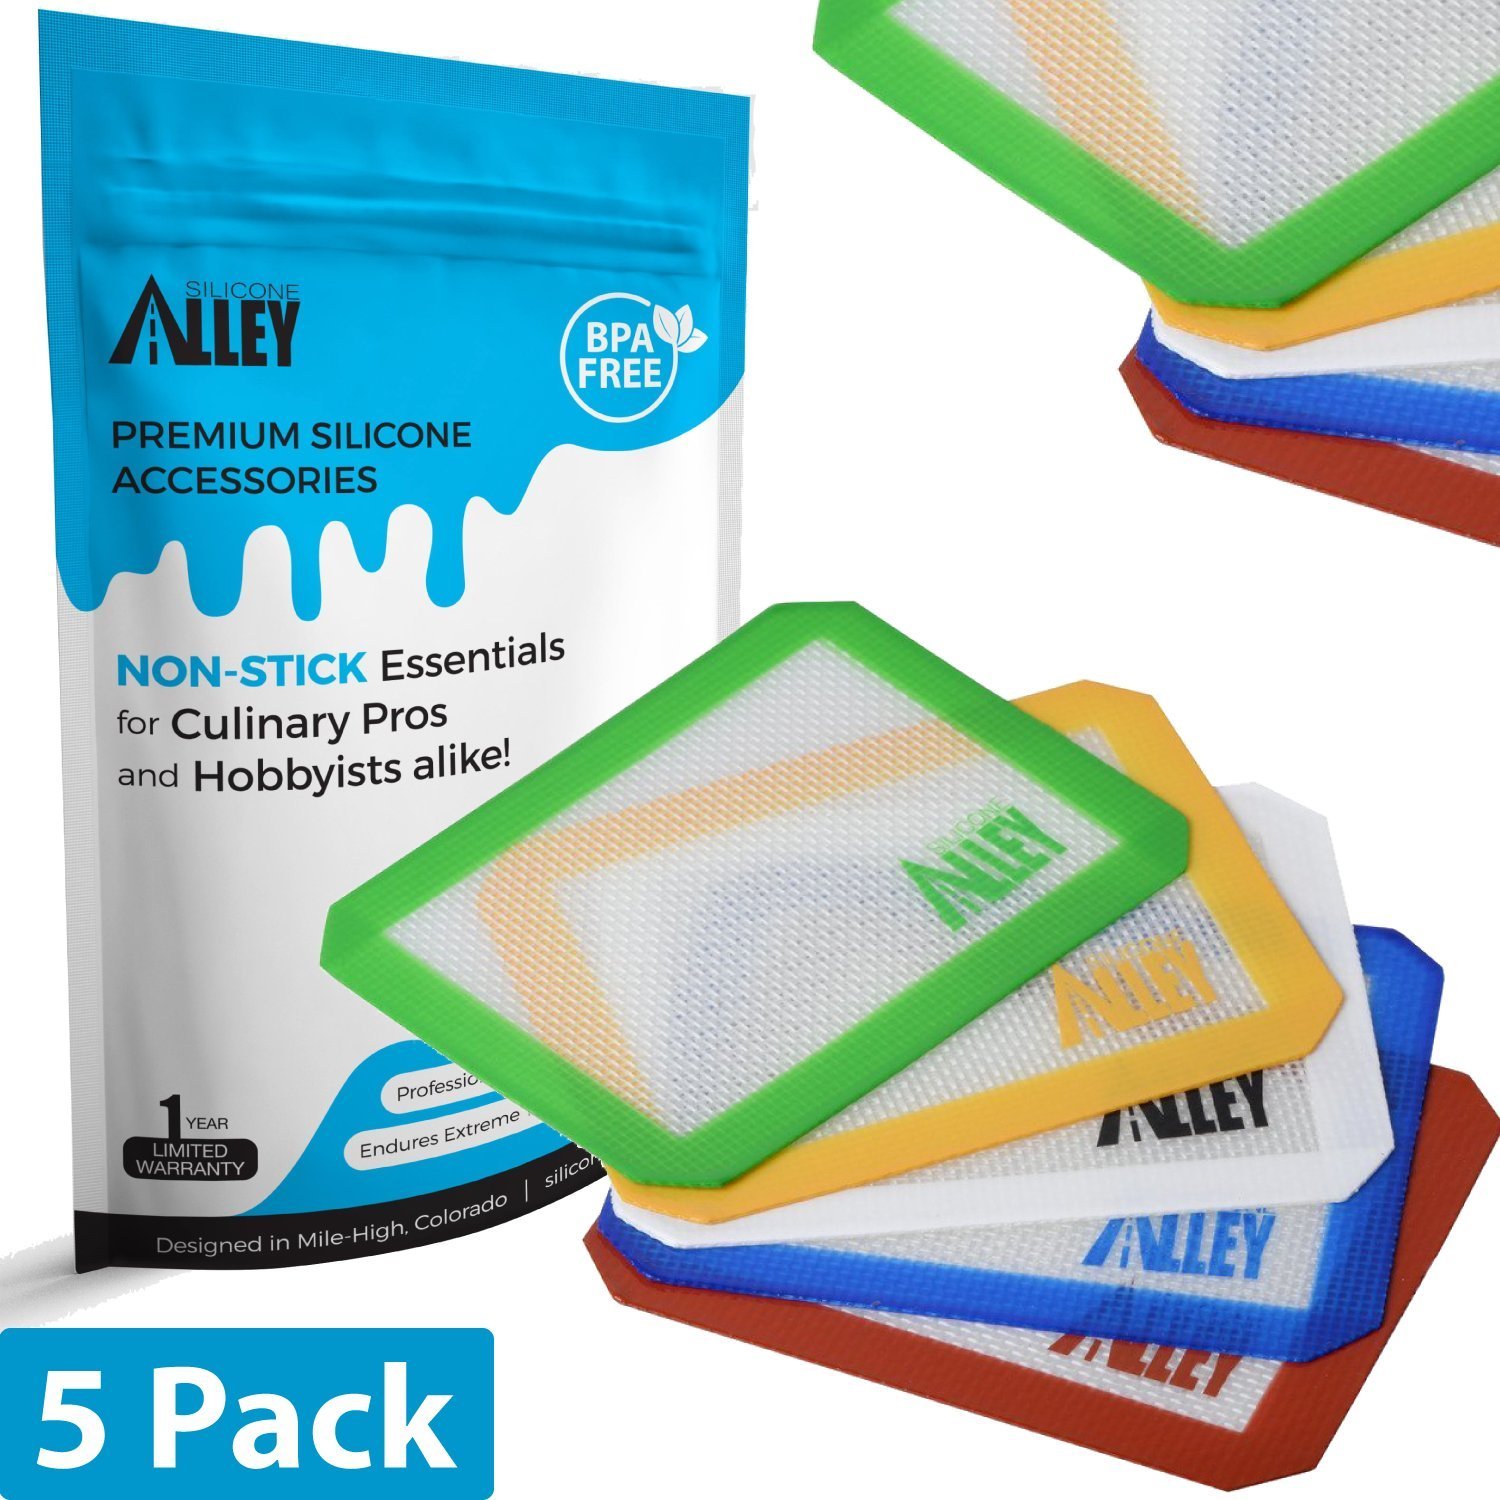 Non-stick Wax Mat Pad [5-Pack] - Silicone Alley